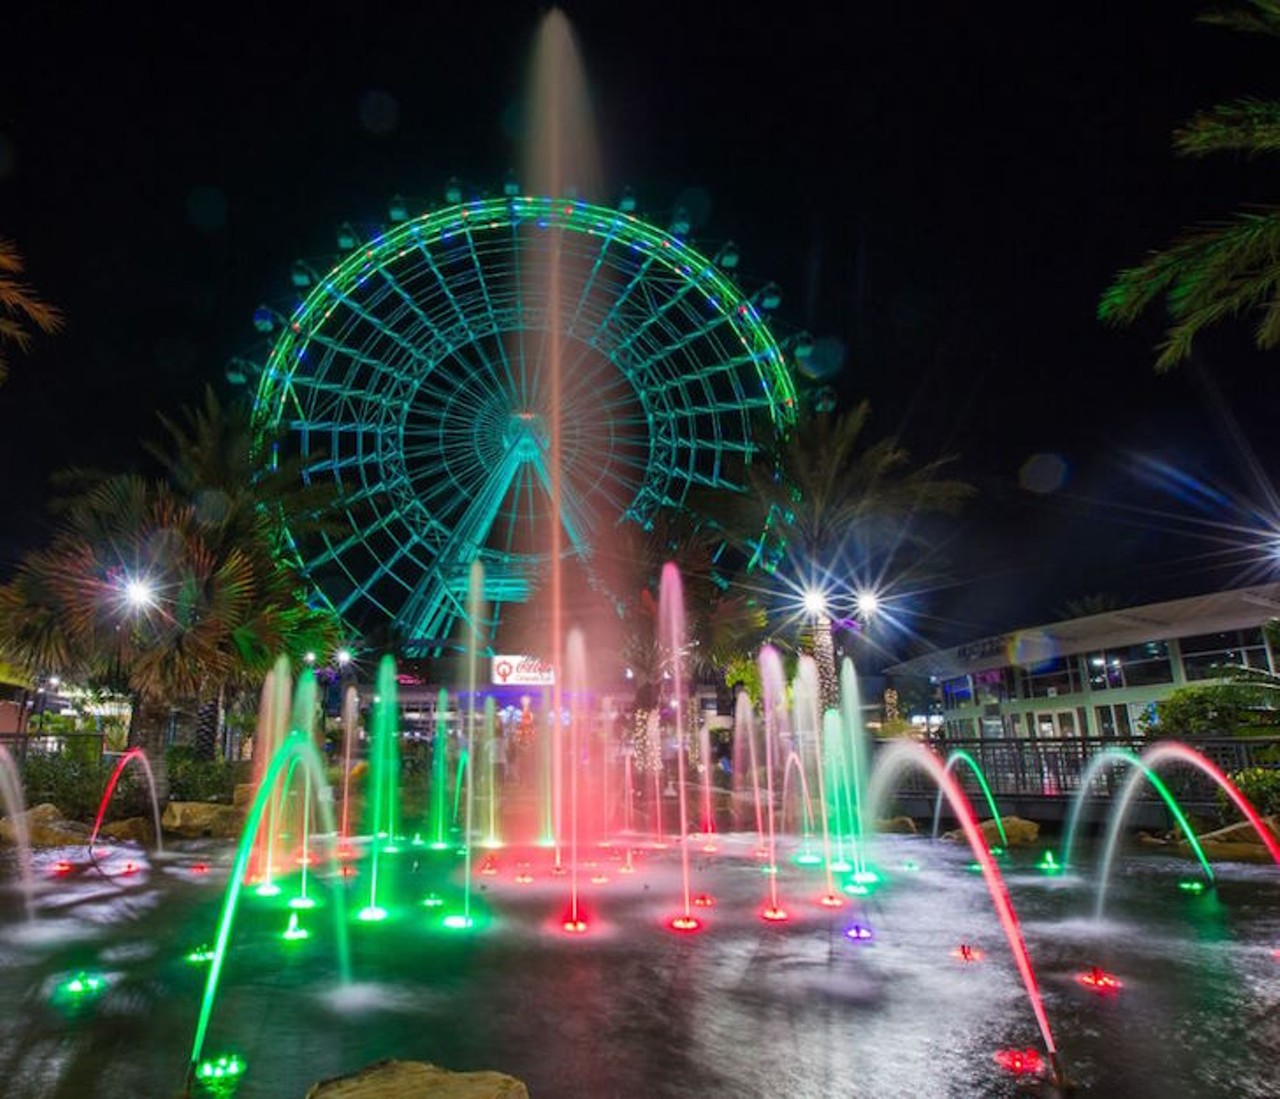 Holidays on the &#147;I&#148;
8401 International Dr #100; 866-228-6438 
I-Drive isn&#146;t just for tourists to enjoy during the holidays, and if you were ever dragged to the Orlando eye or Fun Spot on a family day, then you know what we mean. Take the fam on a North Pole express train or take them to one of the many I-Drive restaurants for a break from the holiday cheer. Snag a picture with the man in red (Santa, that is) on weekdays from 5 to 9 p.m. and from noon to 9 p.m. on weekends. Prices start at $20 and increase with admission to the Orlando Eye.
Photo via the Orlando Eye